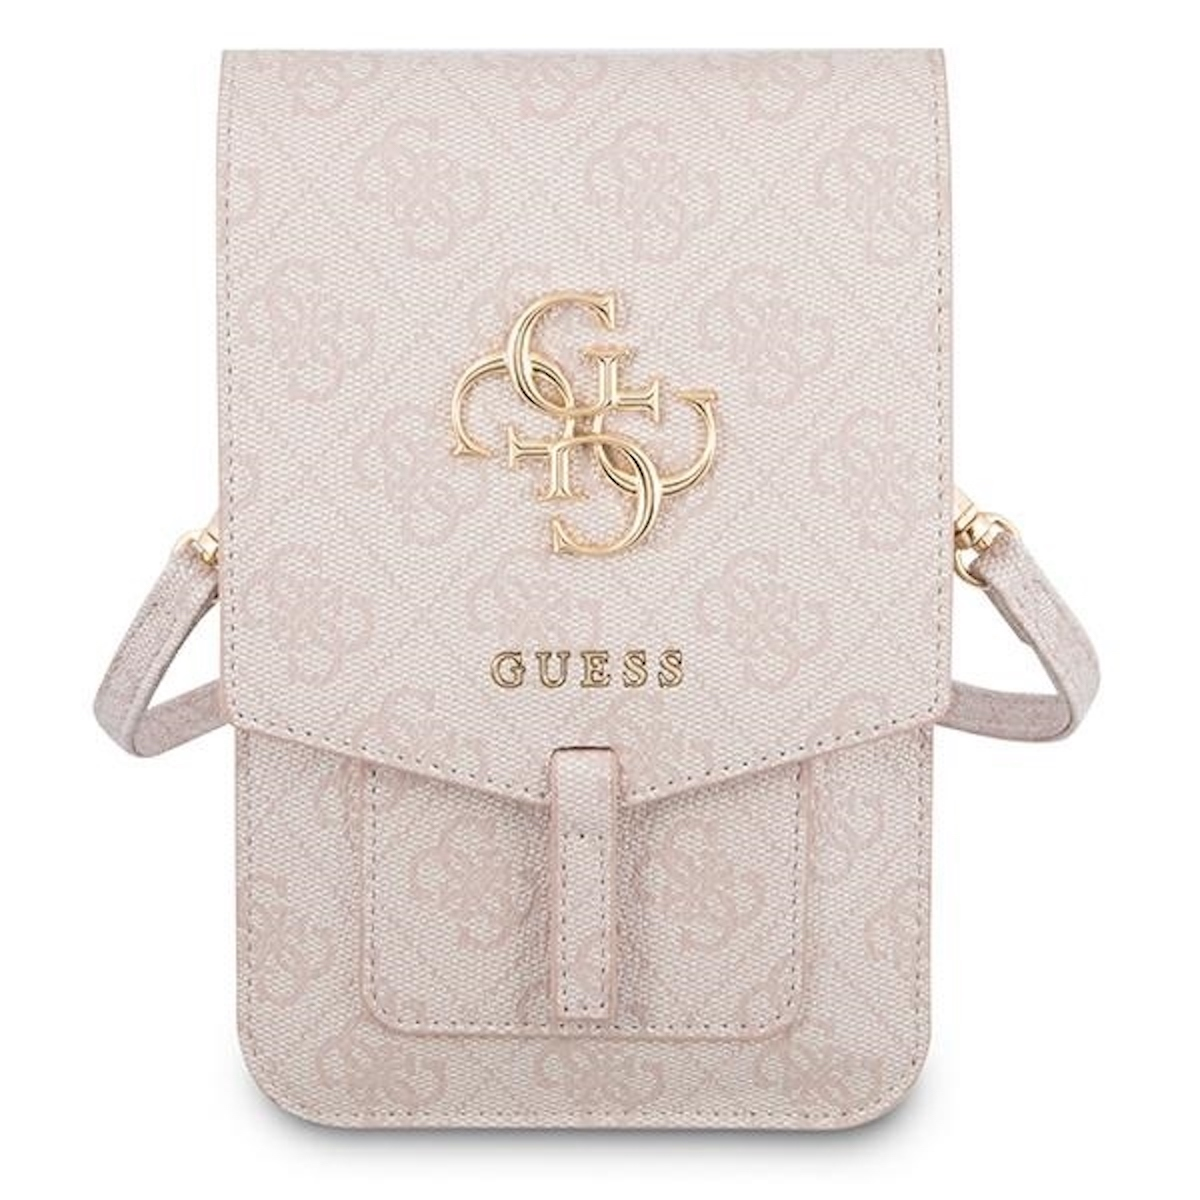 GUESS Torebka Big Logo Rosa Universelle Full Triangle Universell, Tasche, Cover, Umhängetasche